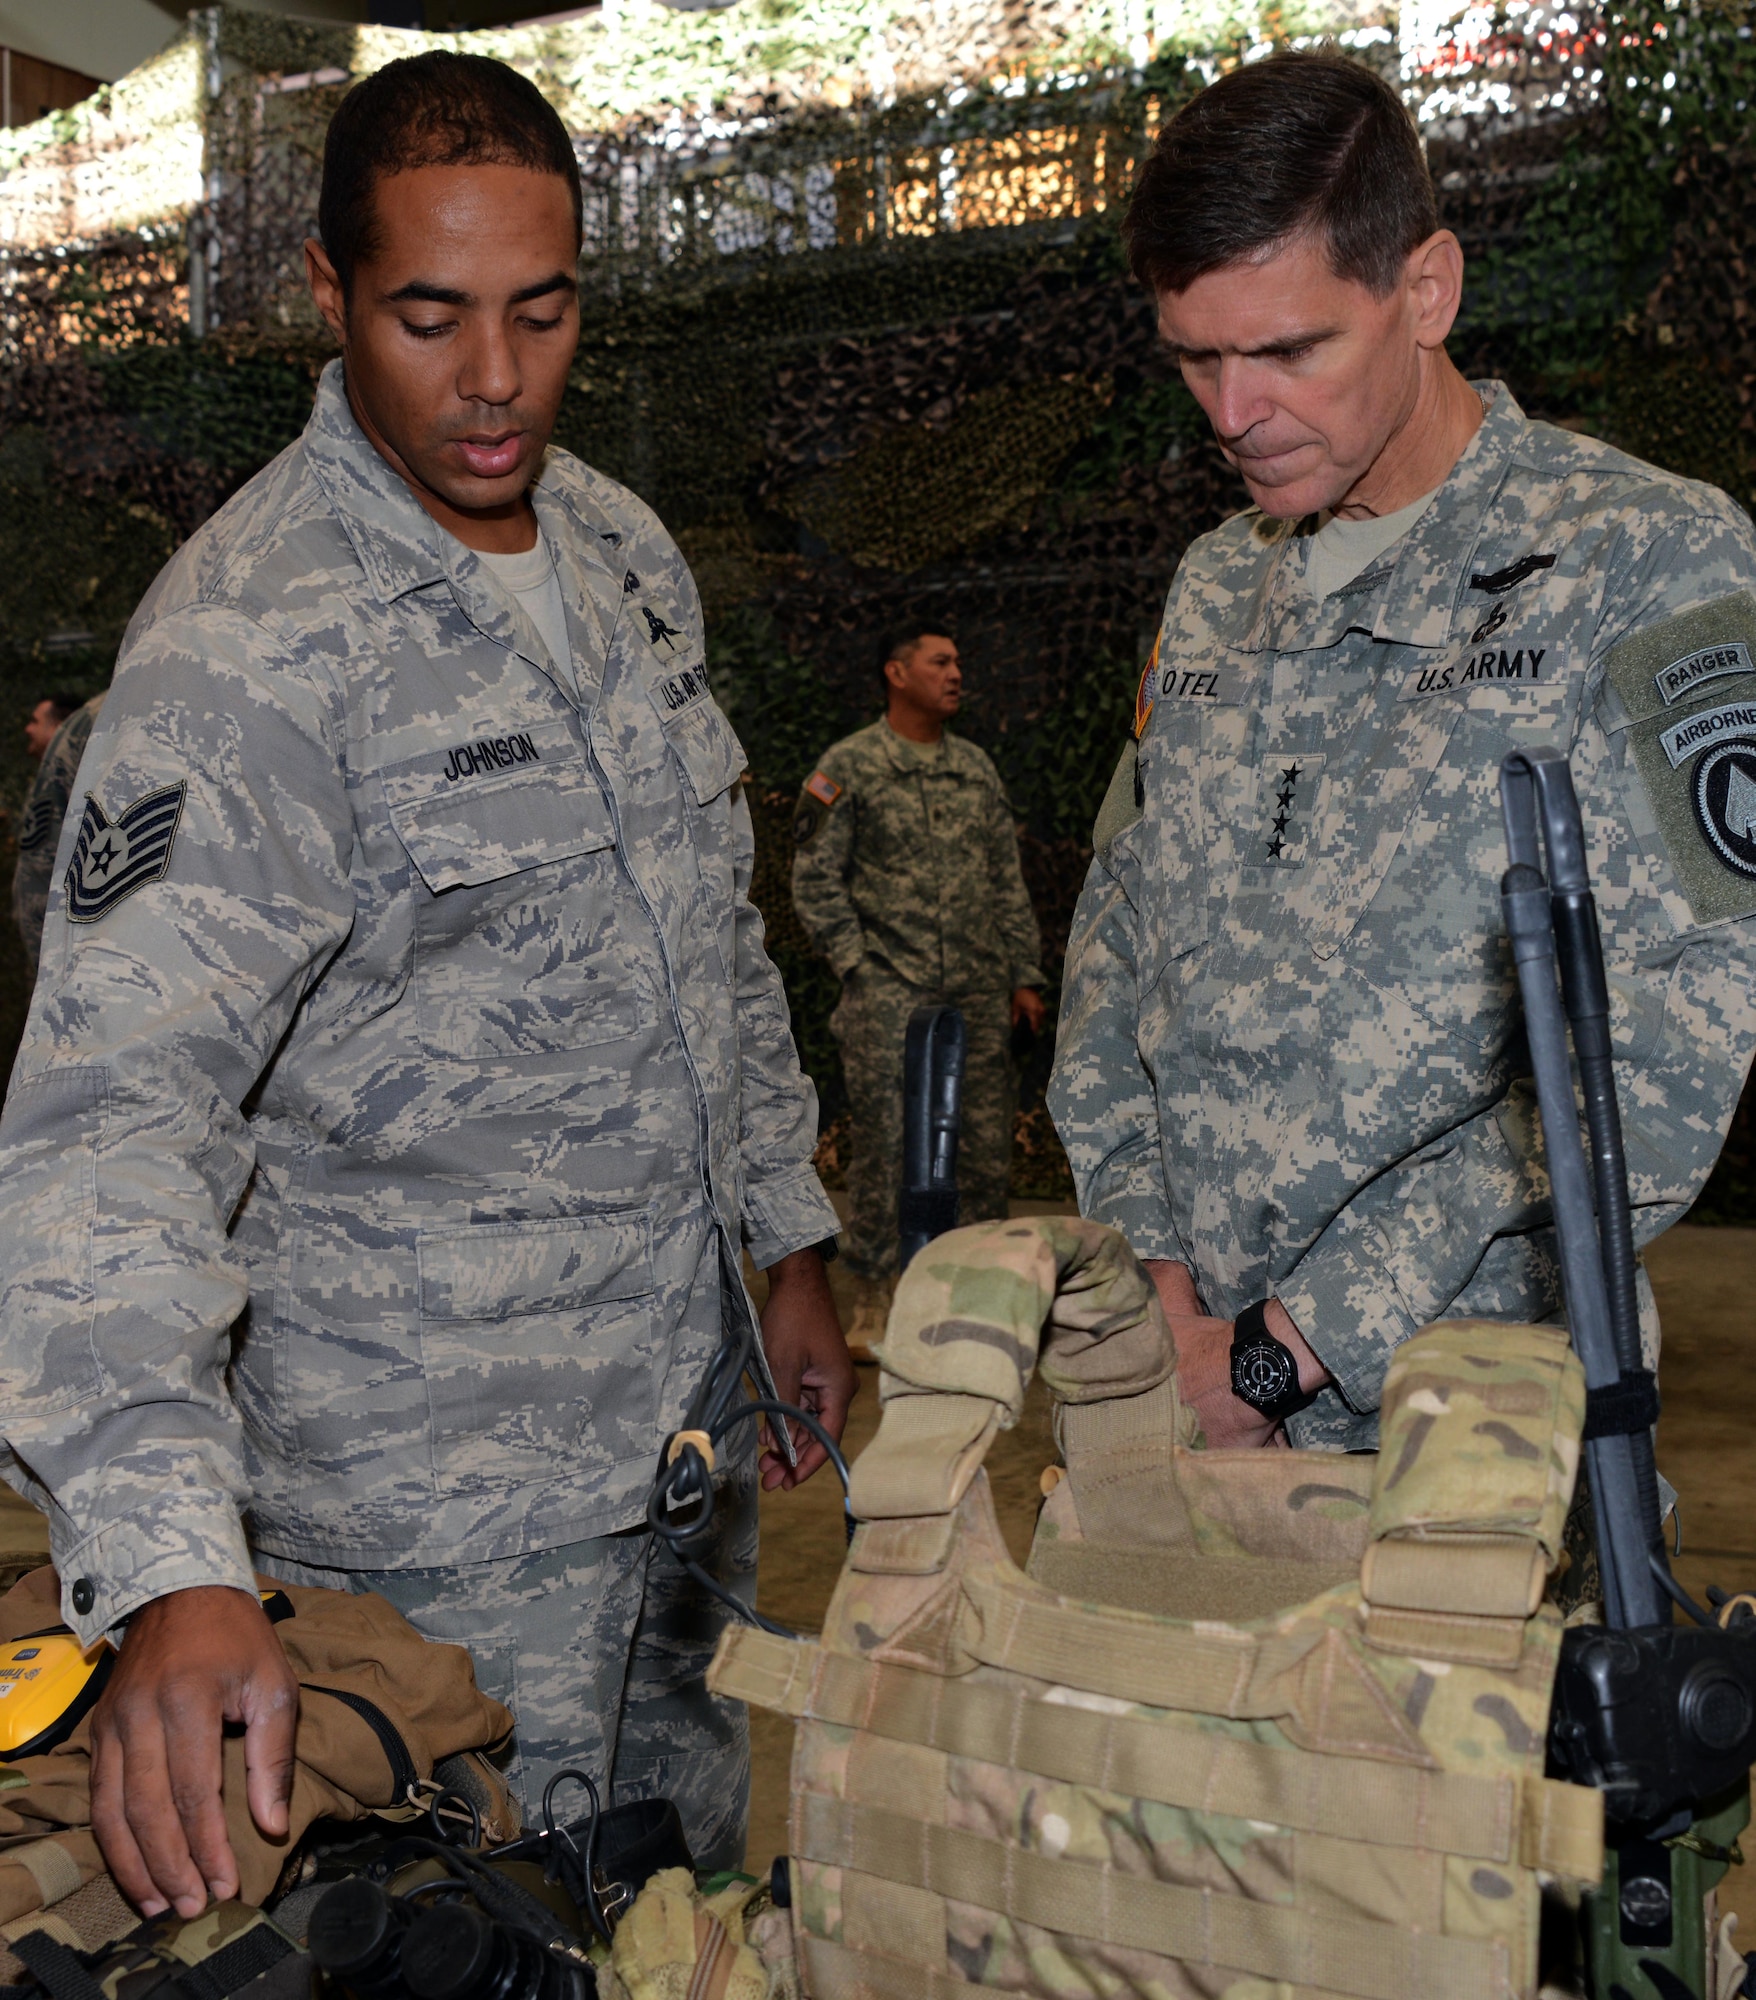 From left, Tech. Sgt. William Johnson, a combat controller with the 320th Special Tactics Squadron, briefs U.S. Army Gen.  Joseph Votel during a visit Dec. 15, 2014 on Kadena Air Base, Japan.  As commander of the U.S. Special Operations Command, Votel visited the 353rd Special Operations Group where he toured facilities and met with the Airmen and their spouses. The visit ended with a town hall meeting where the general spoke to the Airman and their spouses about the future of special operations.  (U.S. Air Force photo by Tech. Sgt. Kristine Dreyer)